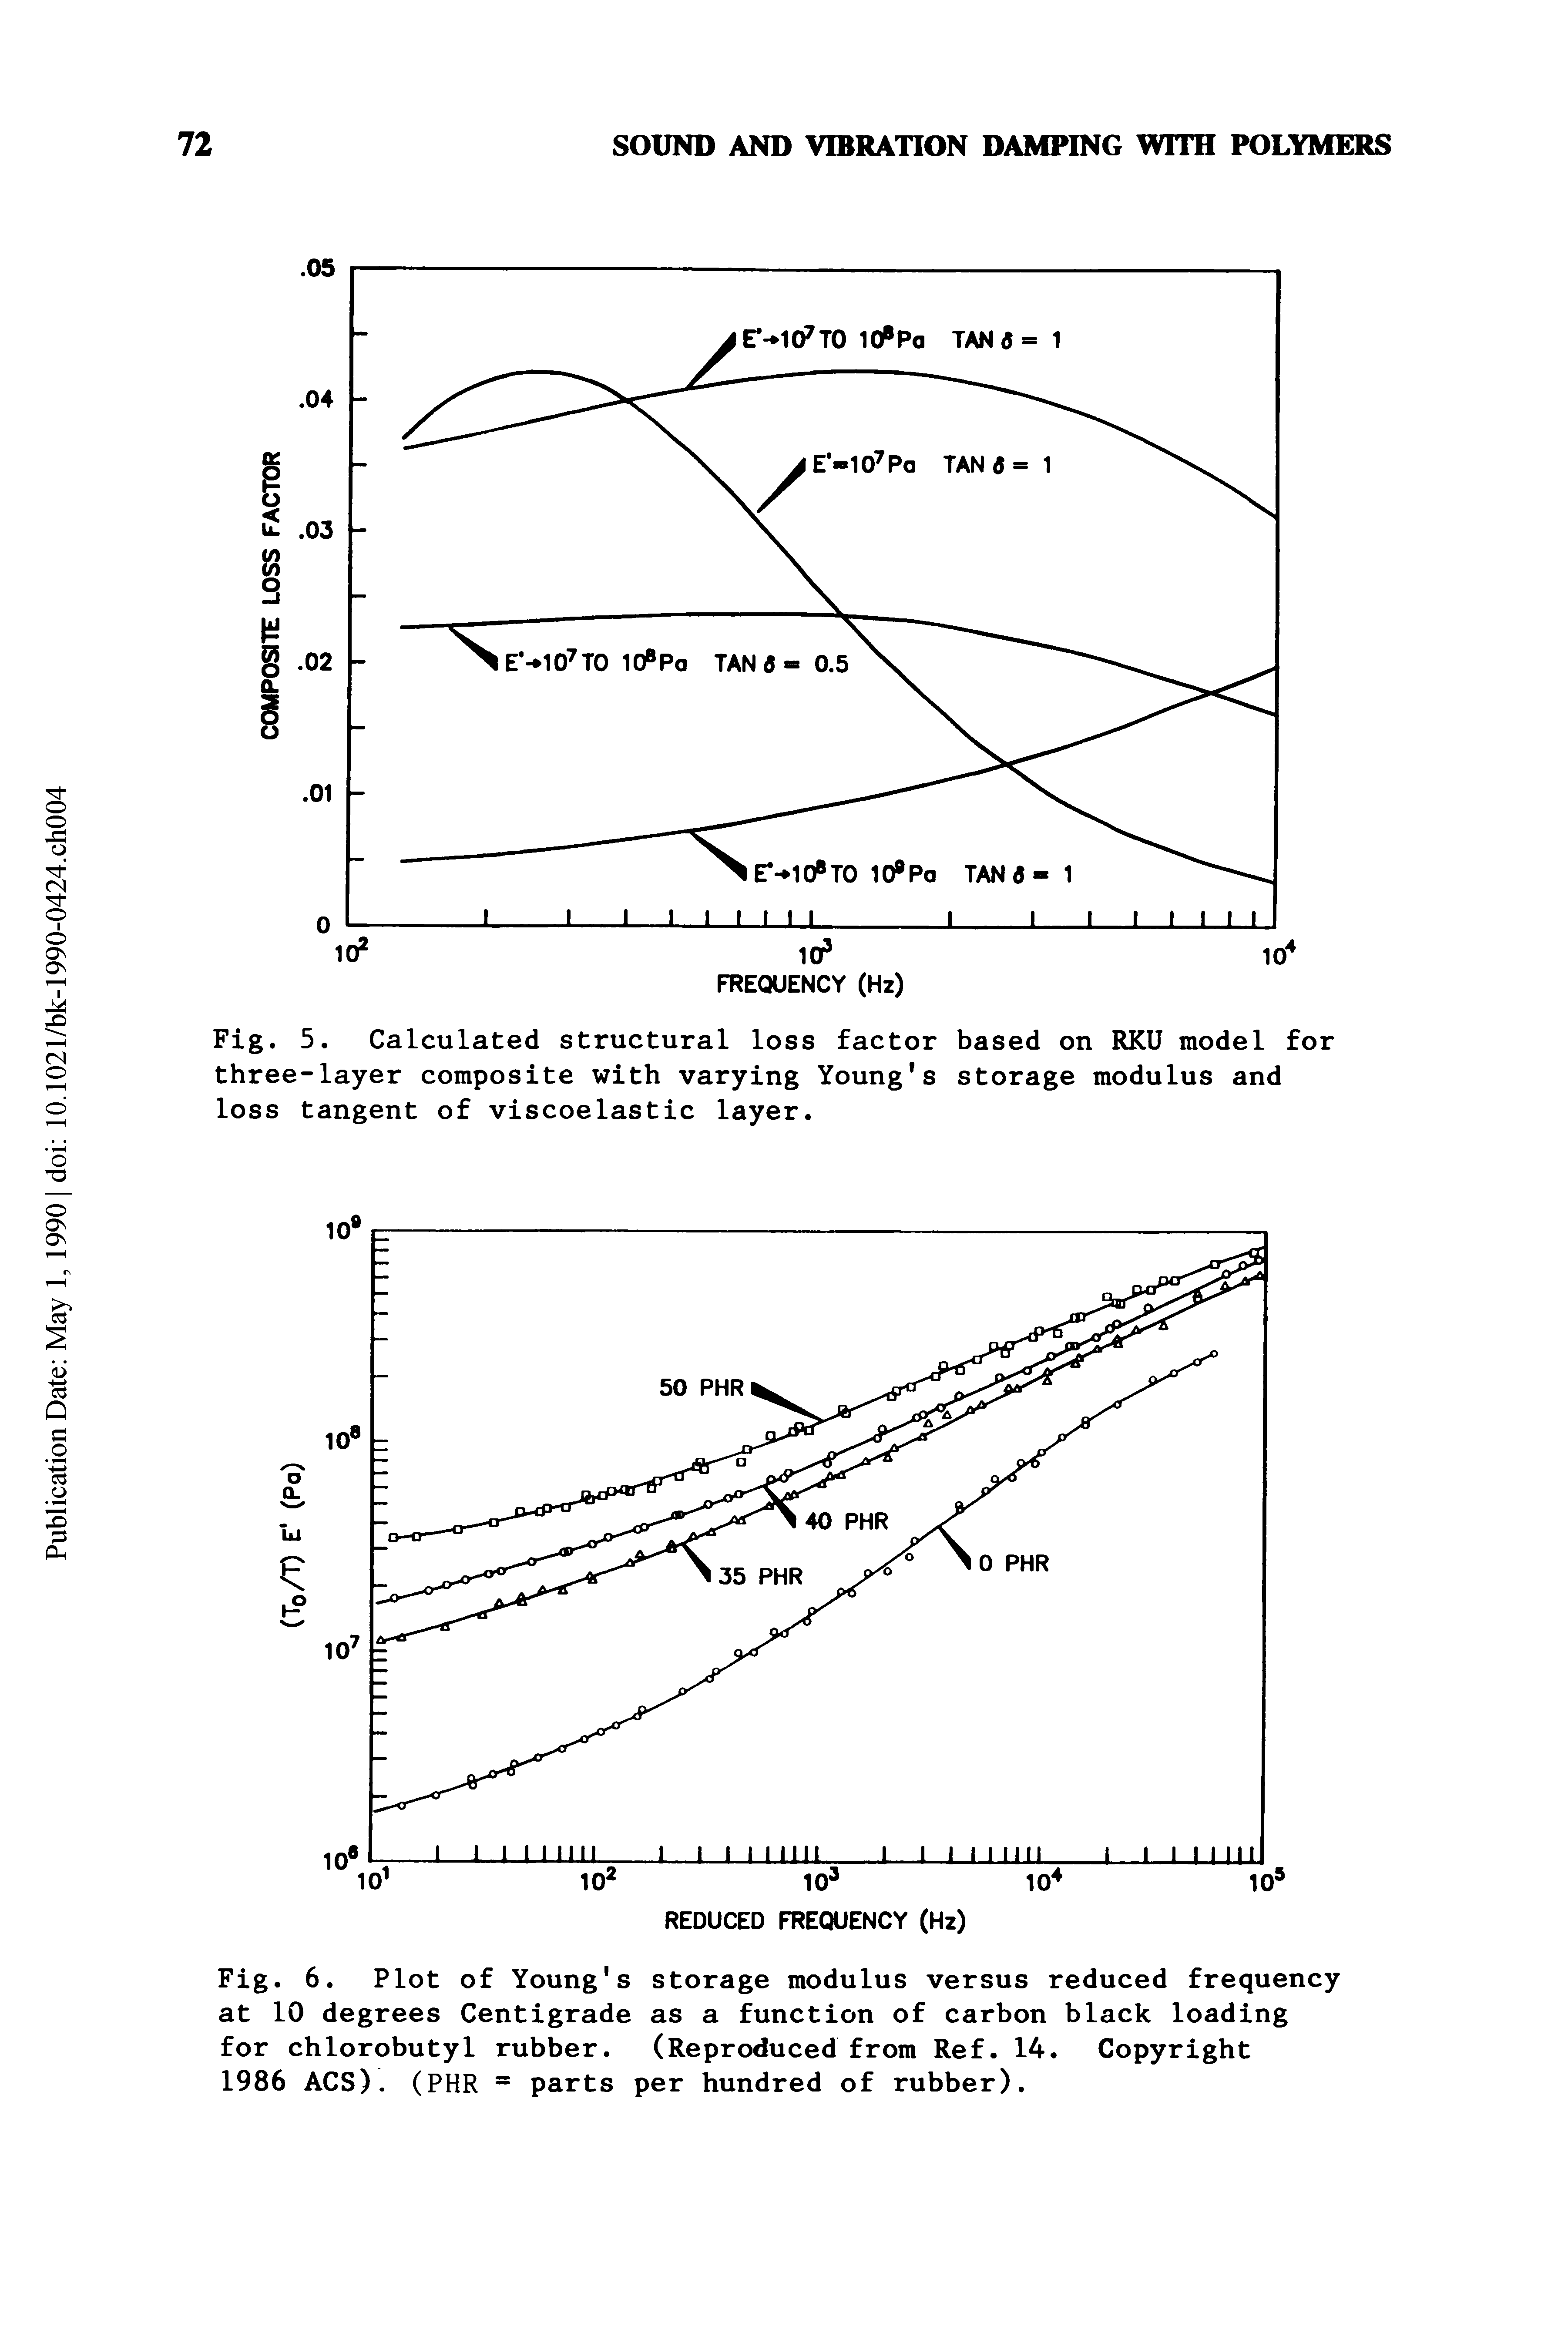 Fig. 5. Calculated structural loss factor based on RKU model for three-layer composite with varying Young s storage modulus and loss tangent of viscoelastic layer.